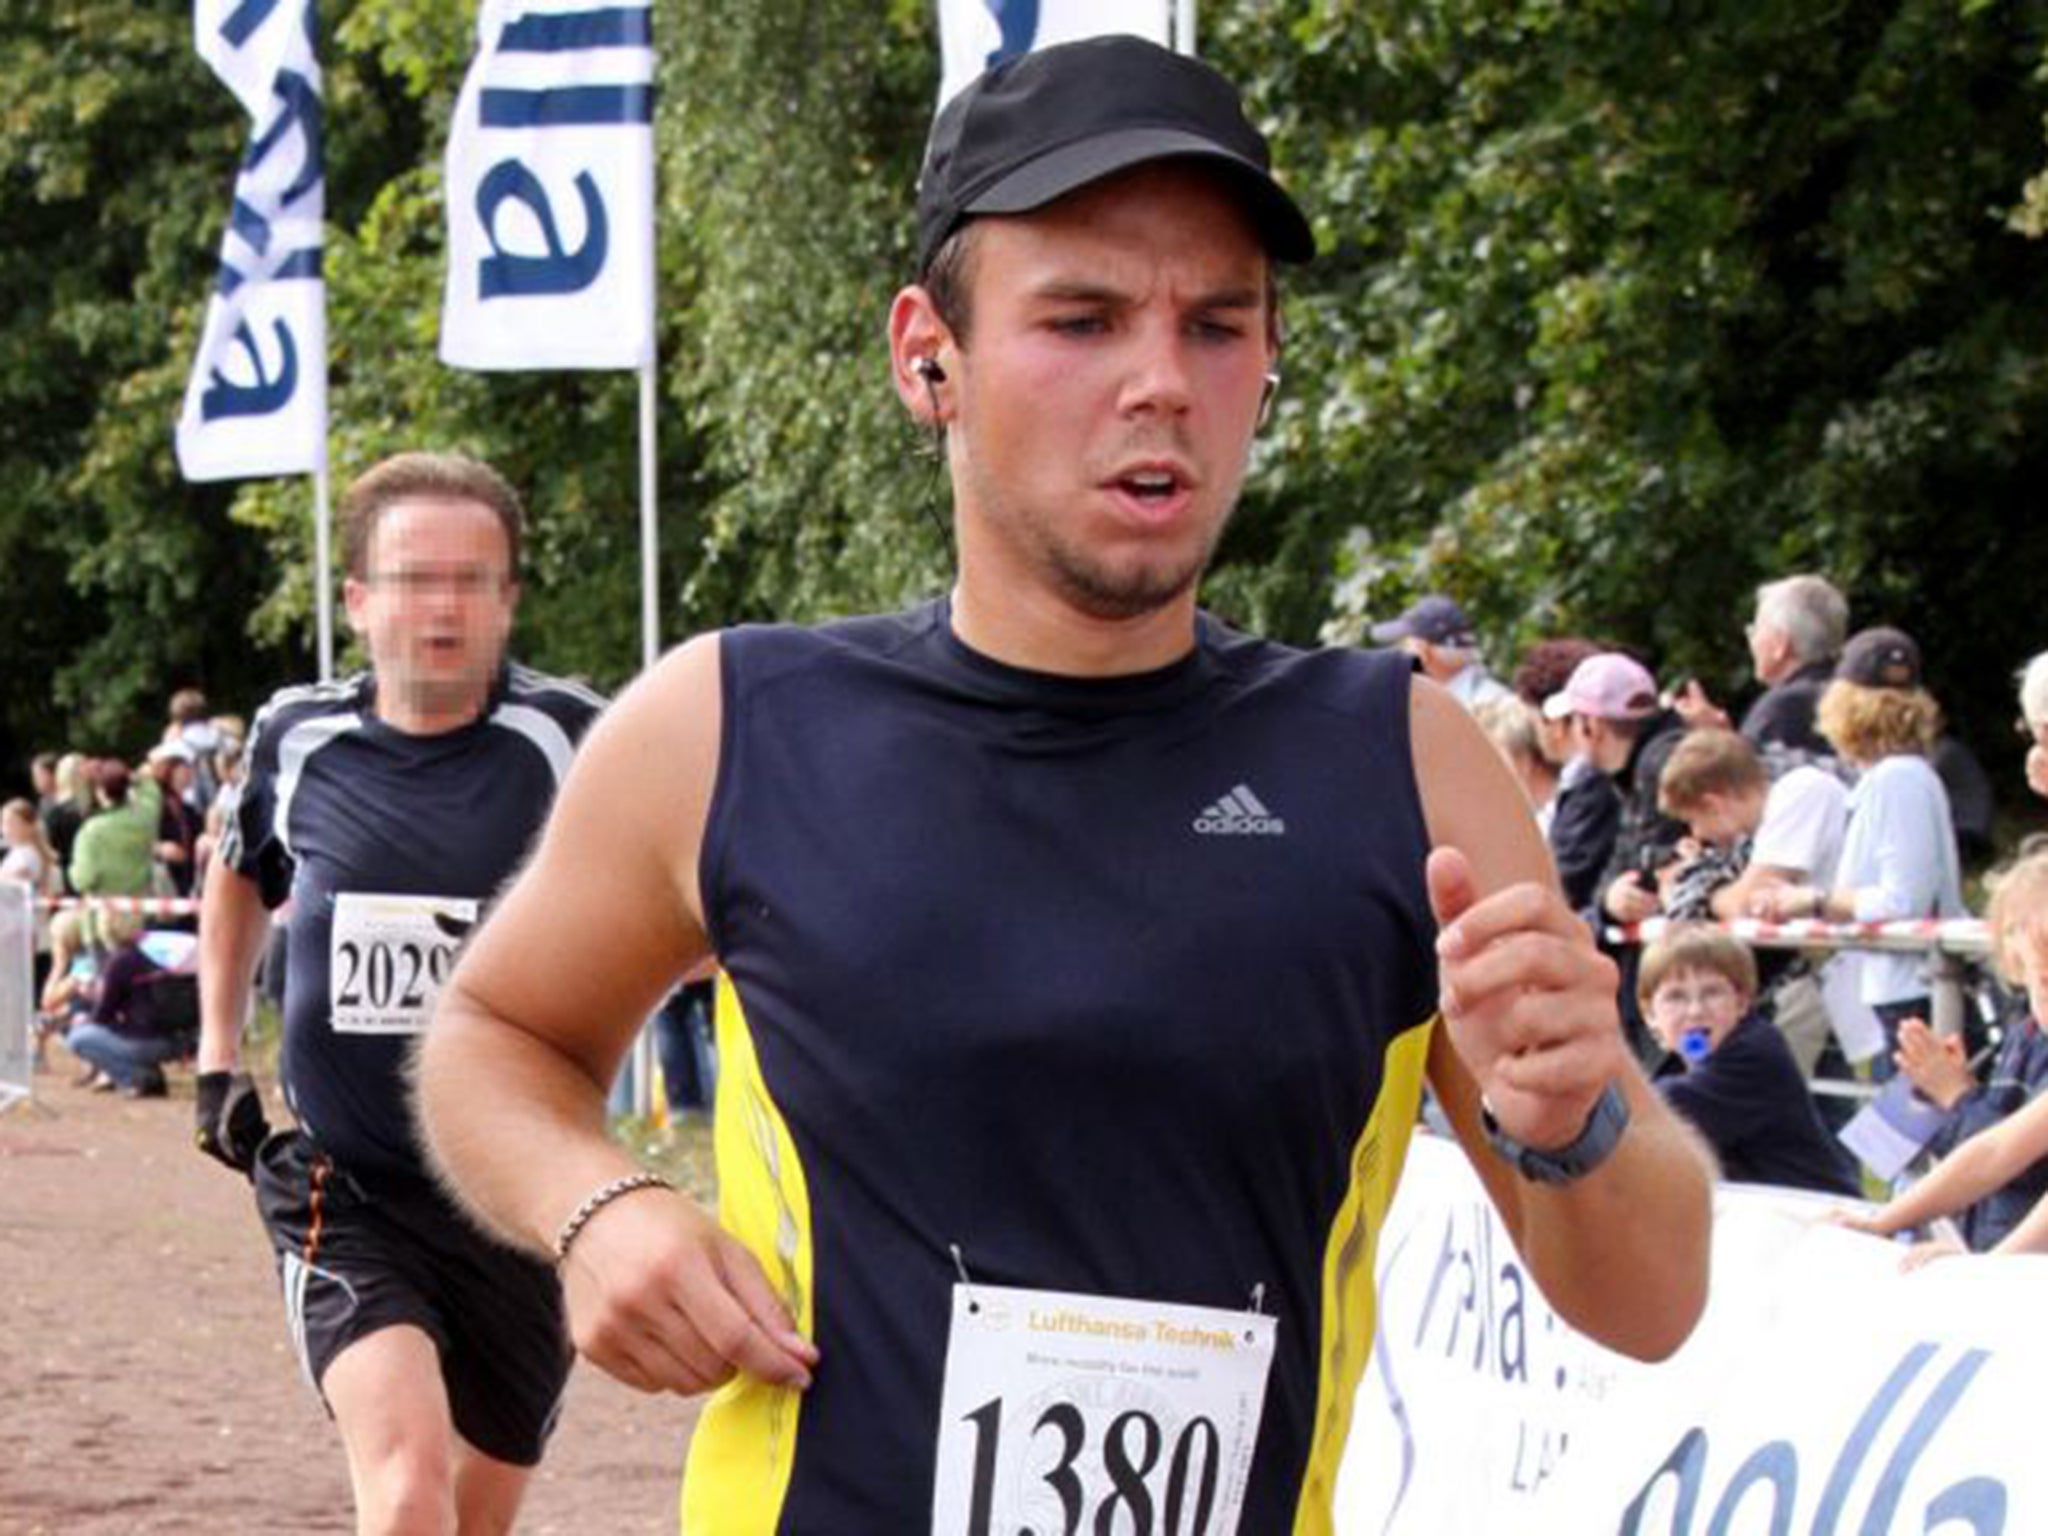 Andreas Lubitz, the pilot who crashed Germanwings flight 9525 into the Alps, was prescribed similar drugs to those which induced psychosis in Katinka Blackford Newman